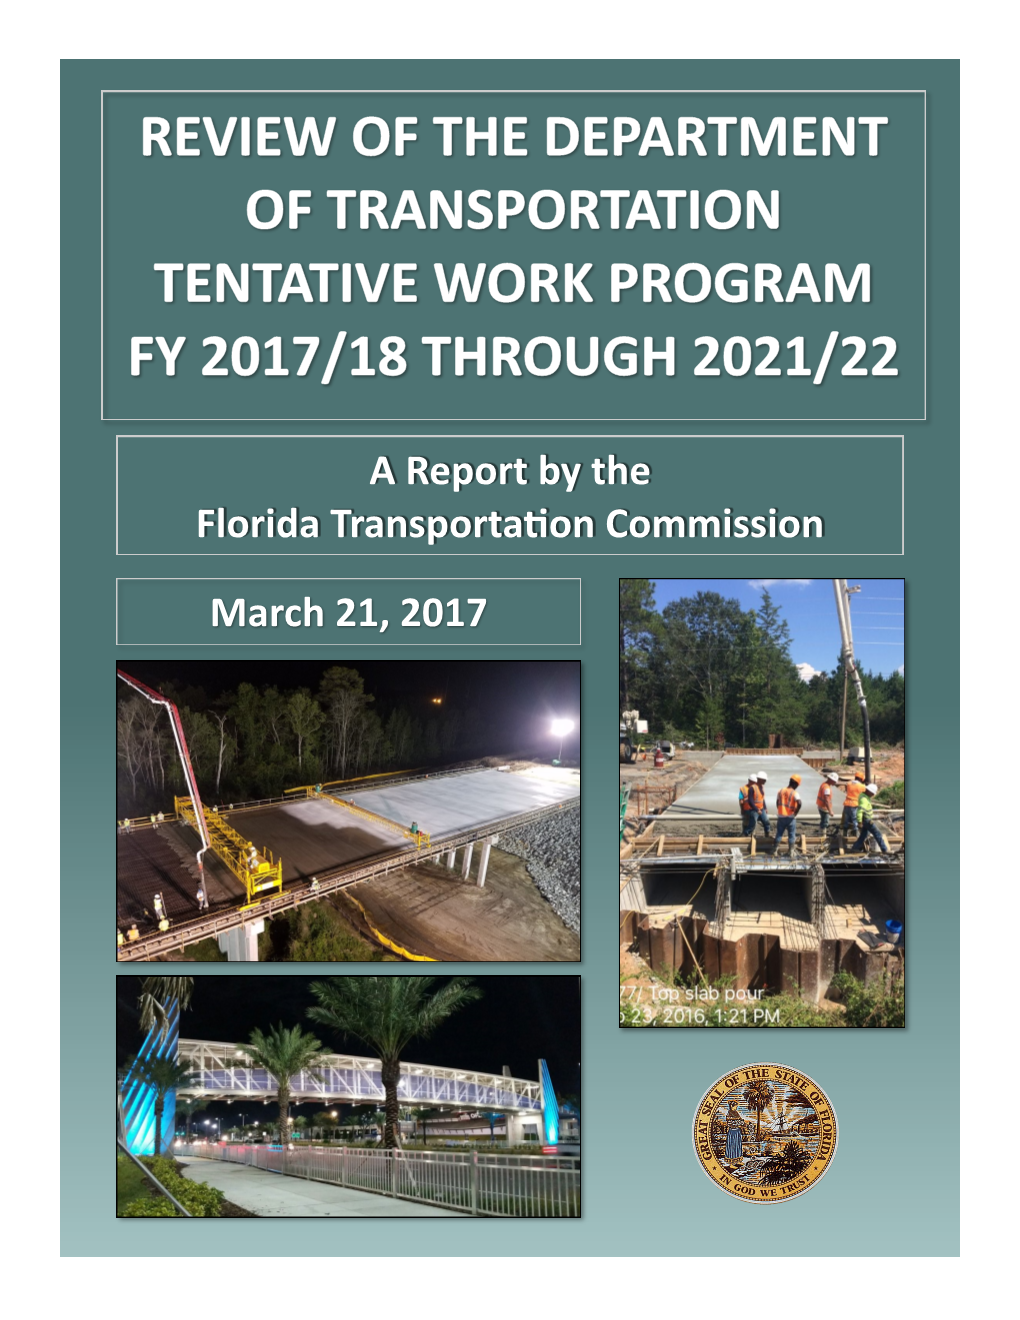 A Report by the Florida Transportation Commission March 21, 2017